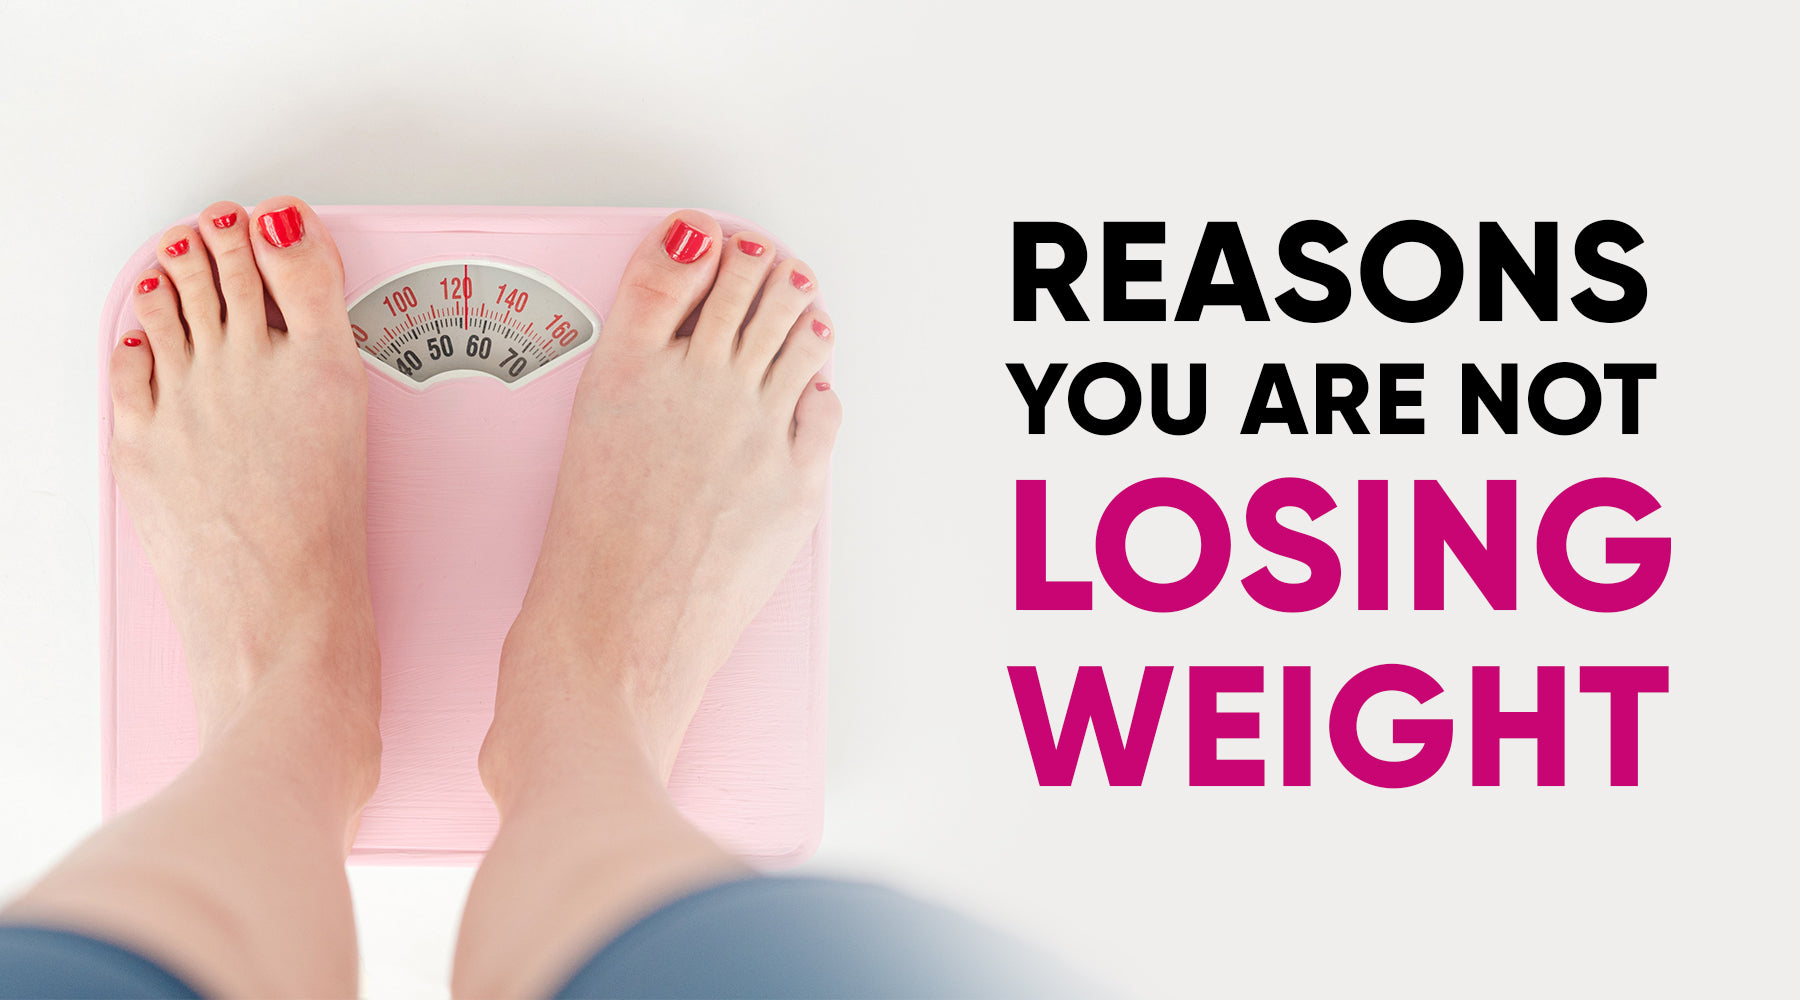 REASONS YOU ARE NOT LOSING WEIGHT